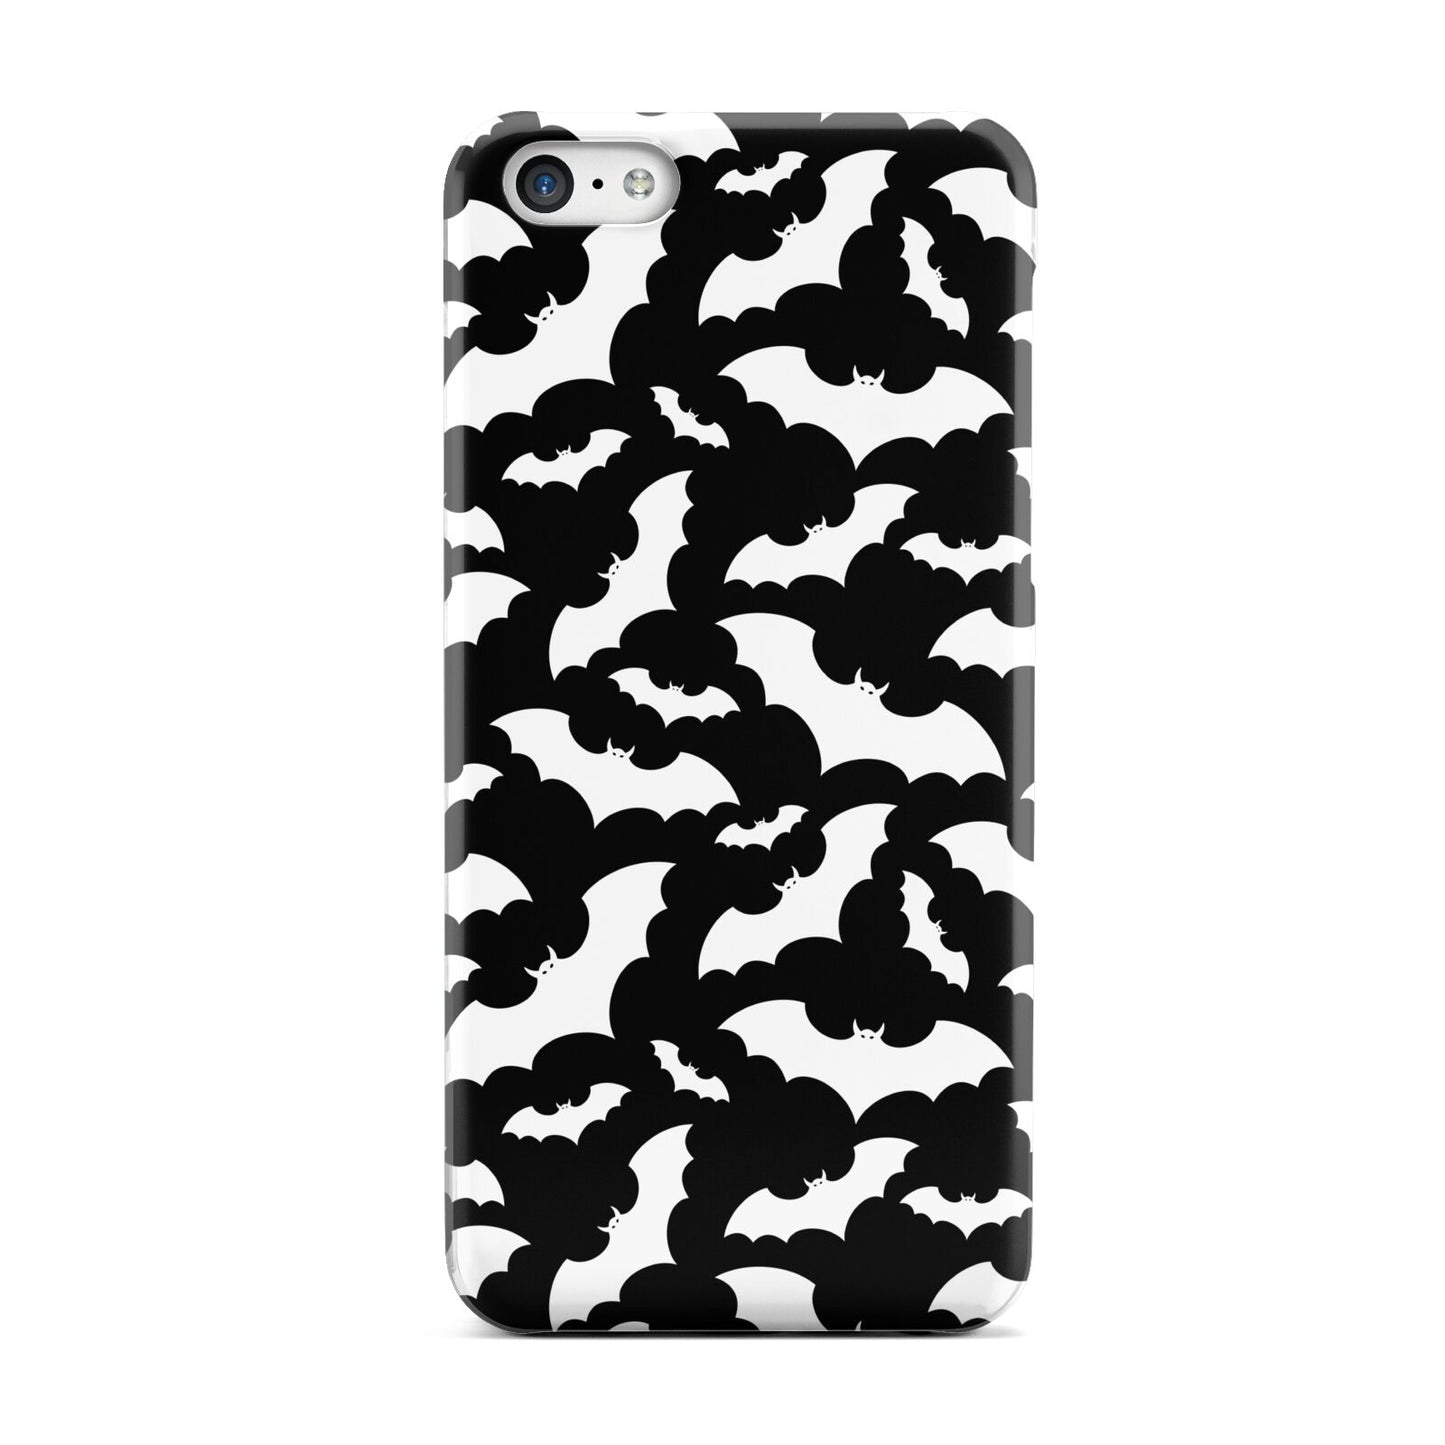 Black and White Bats Apple iPhone 5c Case